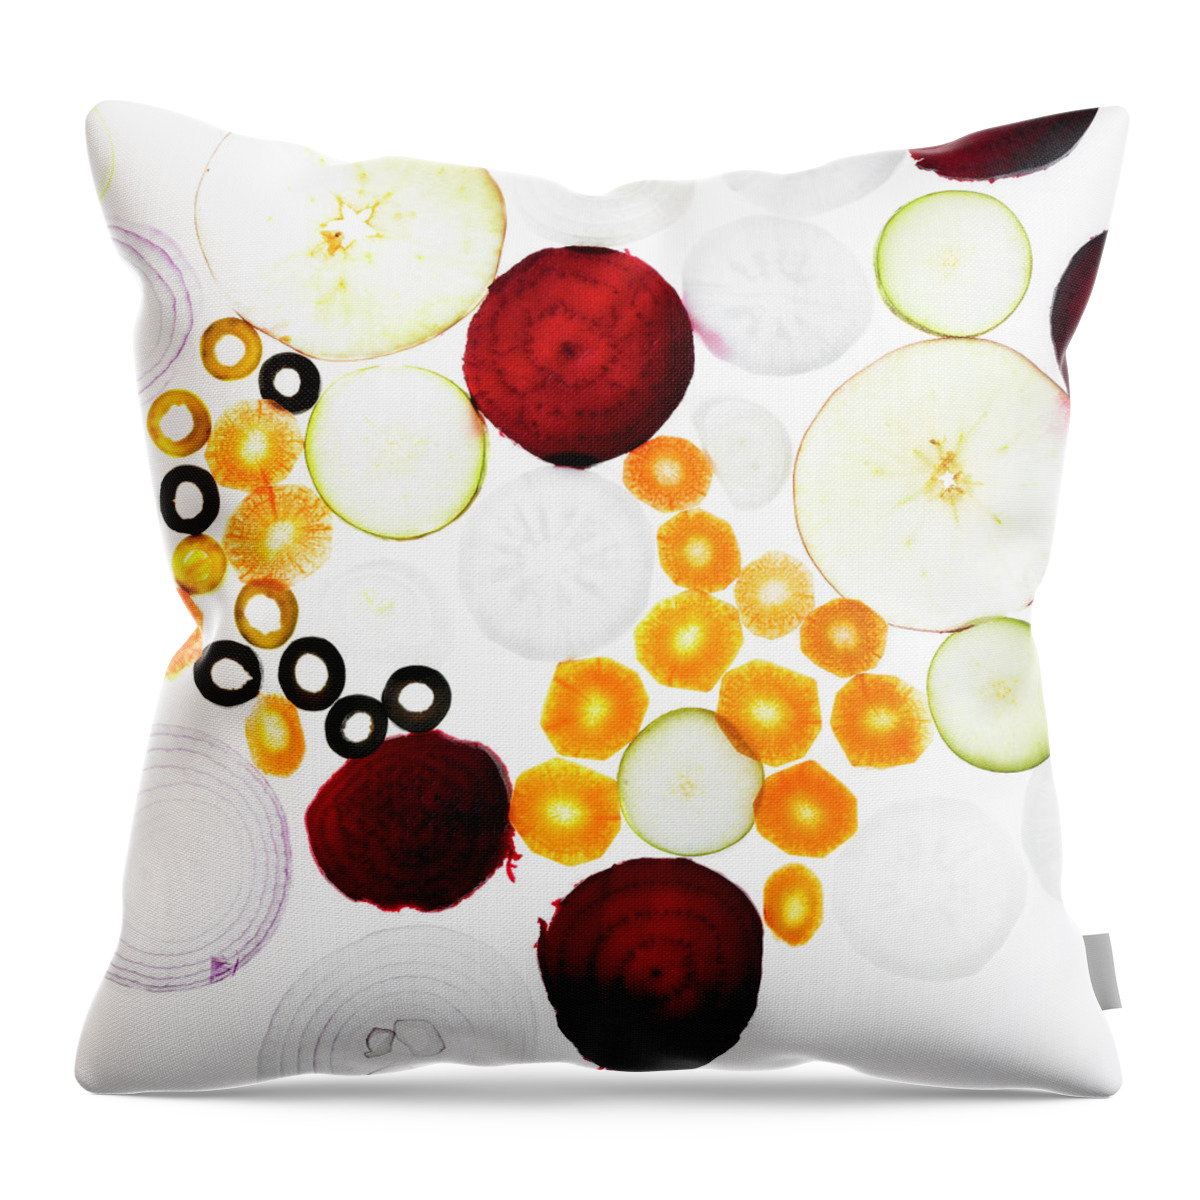 Olive Throw Pillow featuring the photograph Sliced Vegetables On Counter by Lisbeth Hjort